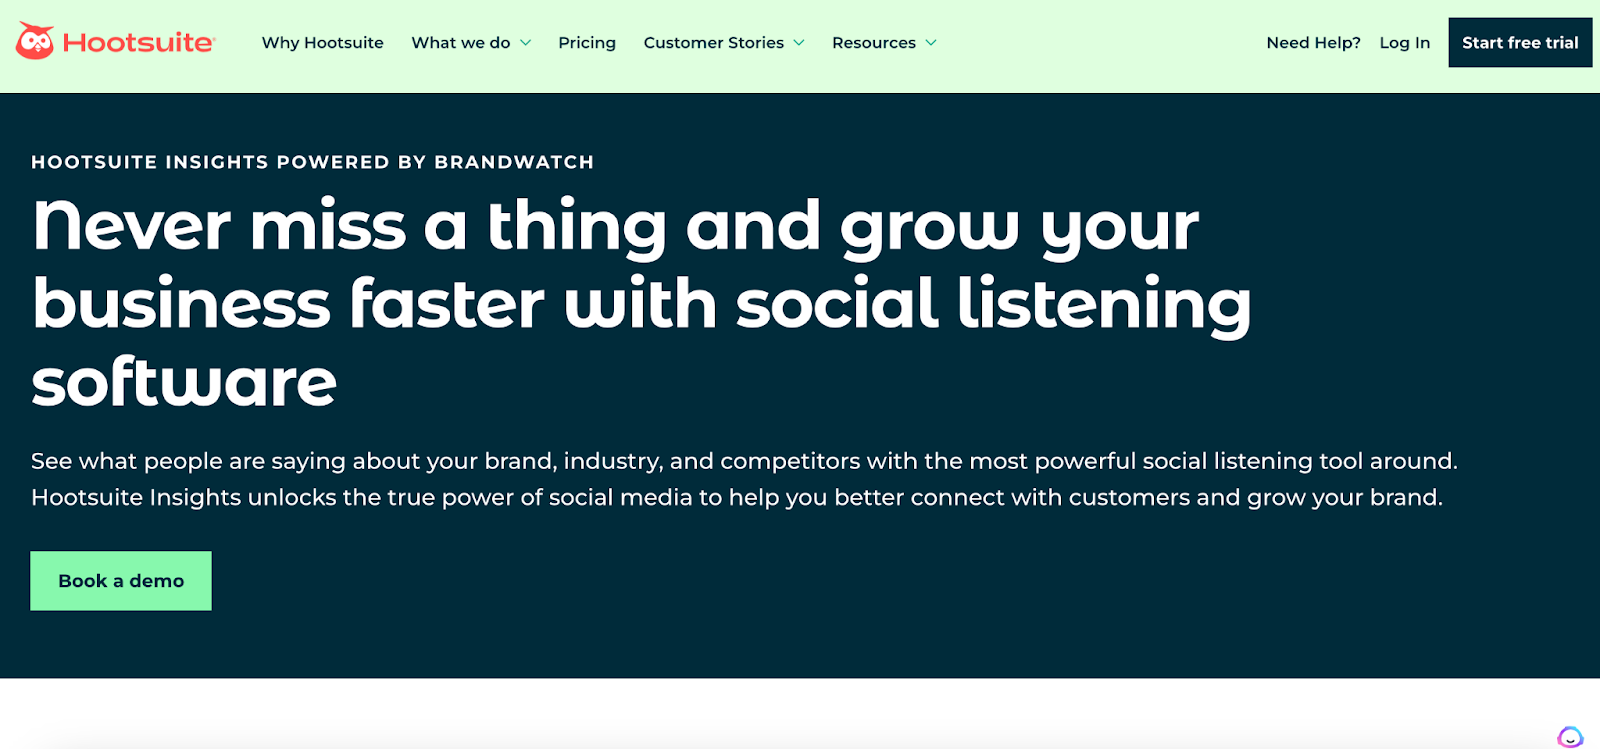 The image displays the main webpage for Hootsuite Insights stating, “Never miss a thing and grow your business faster with social listening software.” The website gives users the option to book a demo.
